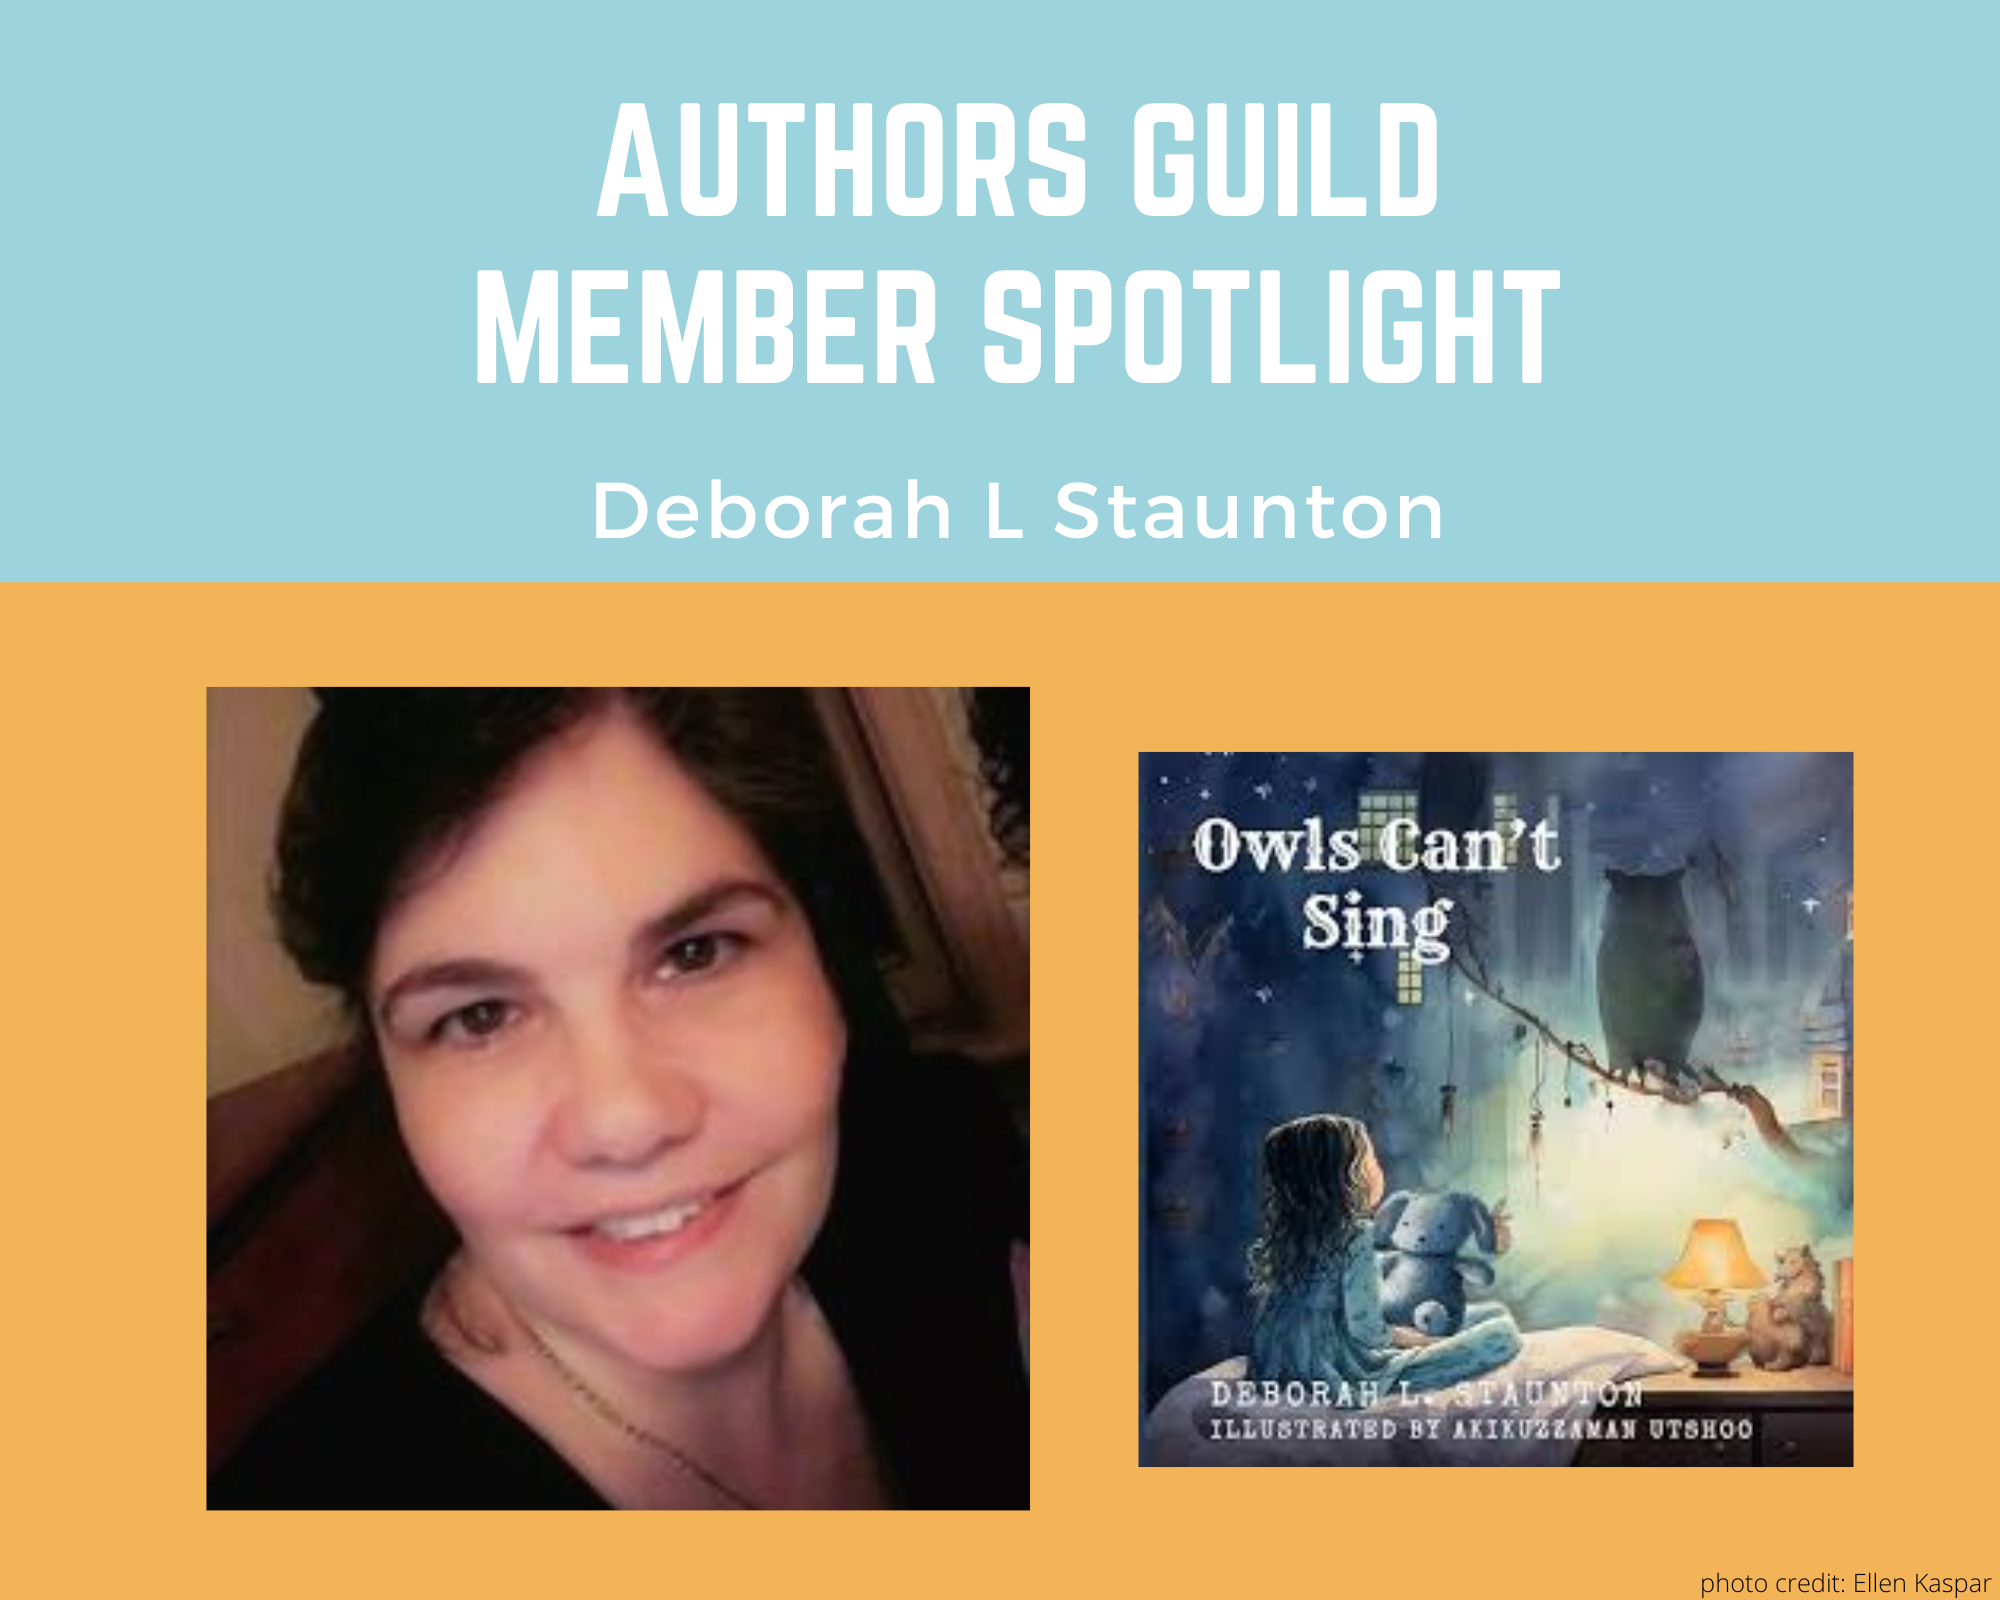 author Deborah Staunton and her book Owls Can't Sing